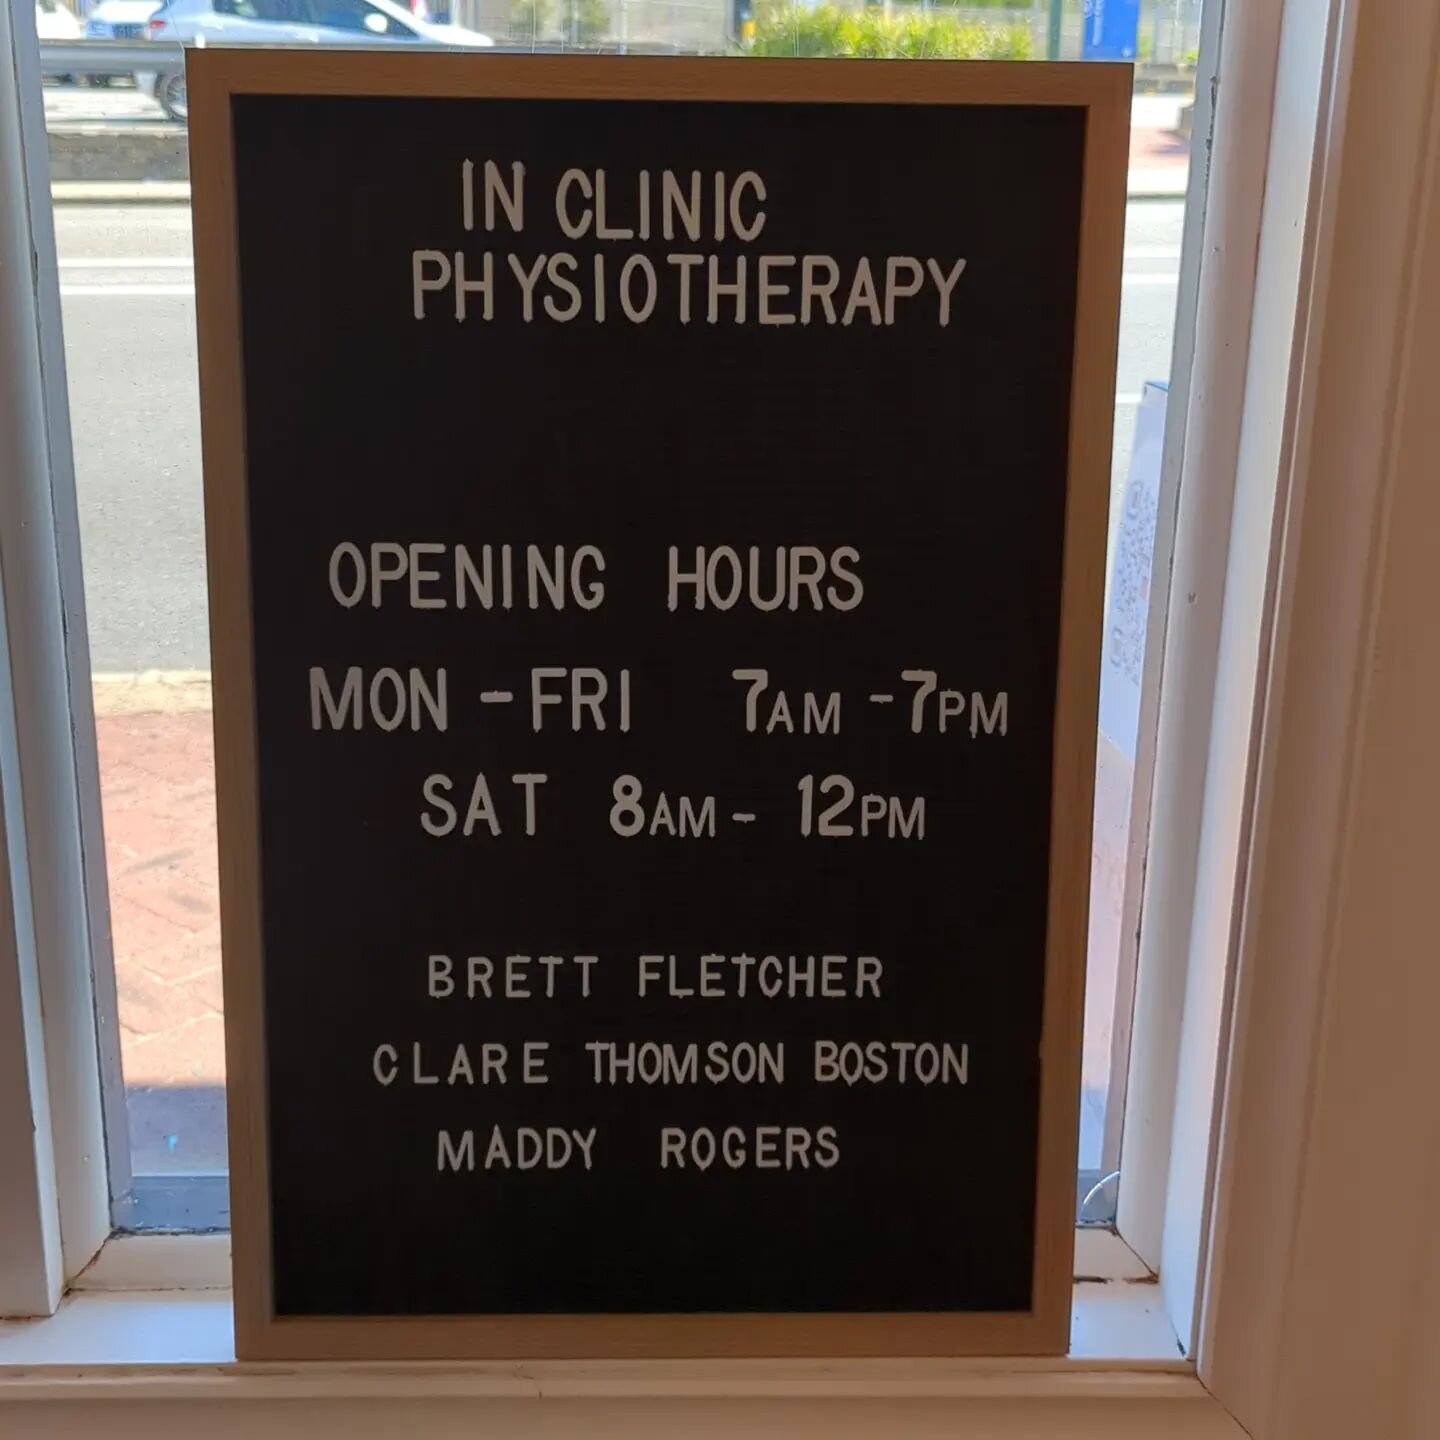 Taking a leaf outta the hip freo cafes and letting everyone know our opening hours on this pretty cool little felt board. 

Open for business everyday except Sunday (a day of rest). Or not for most of you who book in to see us on the Monday 😂

#mosm